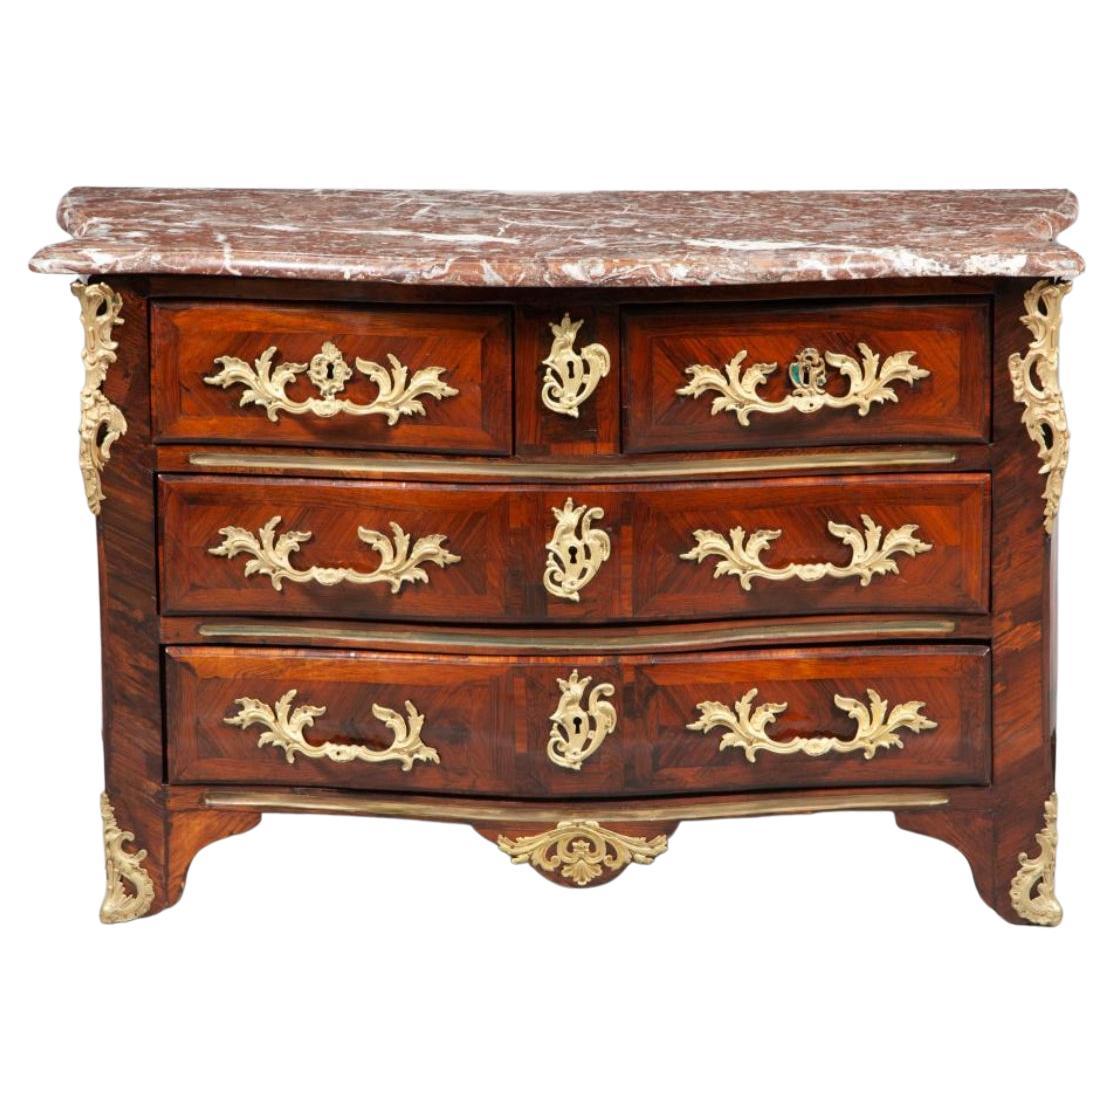 Introducing a stunning and rare piece of furniture that embodies the elegance and sophistication of 18th century French design - the early 18th century French Commode with Rosewood Inlay.

Crafted from oak and featuring a beautiful serpentine